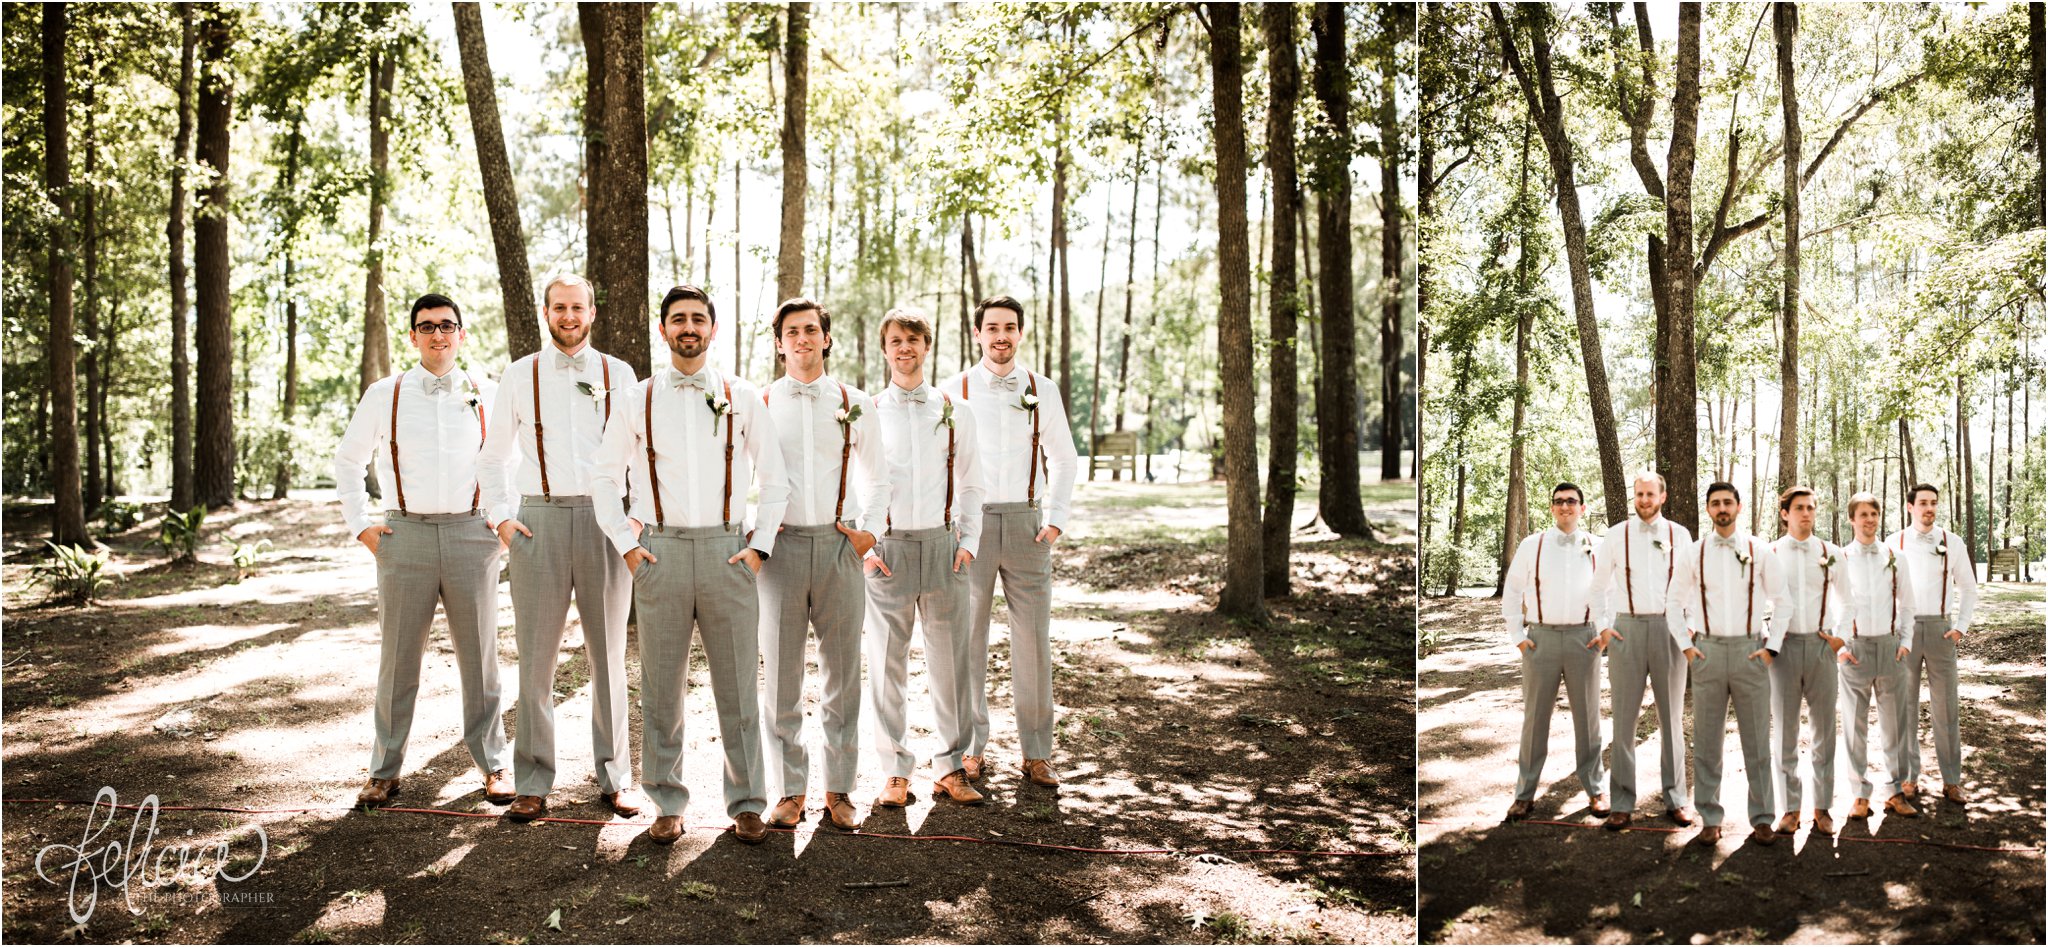 images by feliciathephotographer.com | destination wedding | the makey house | dave gibson coordinator | travel photographer | Savannah, georgia | southern | portrait | groomsmen | game face | pre-ceremony | trees | forest | brown hipster shoes | suspenders | bow ties | green